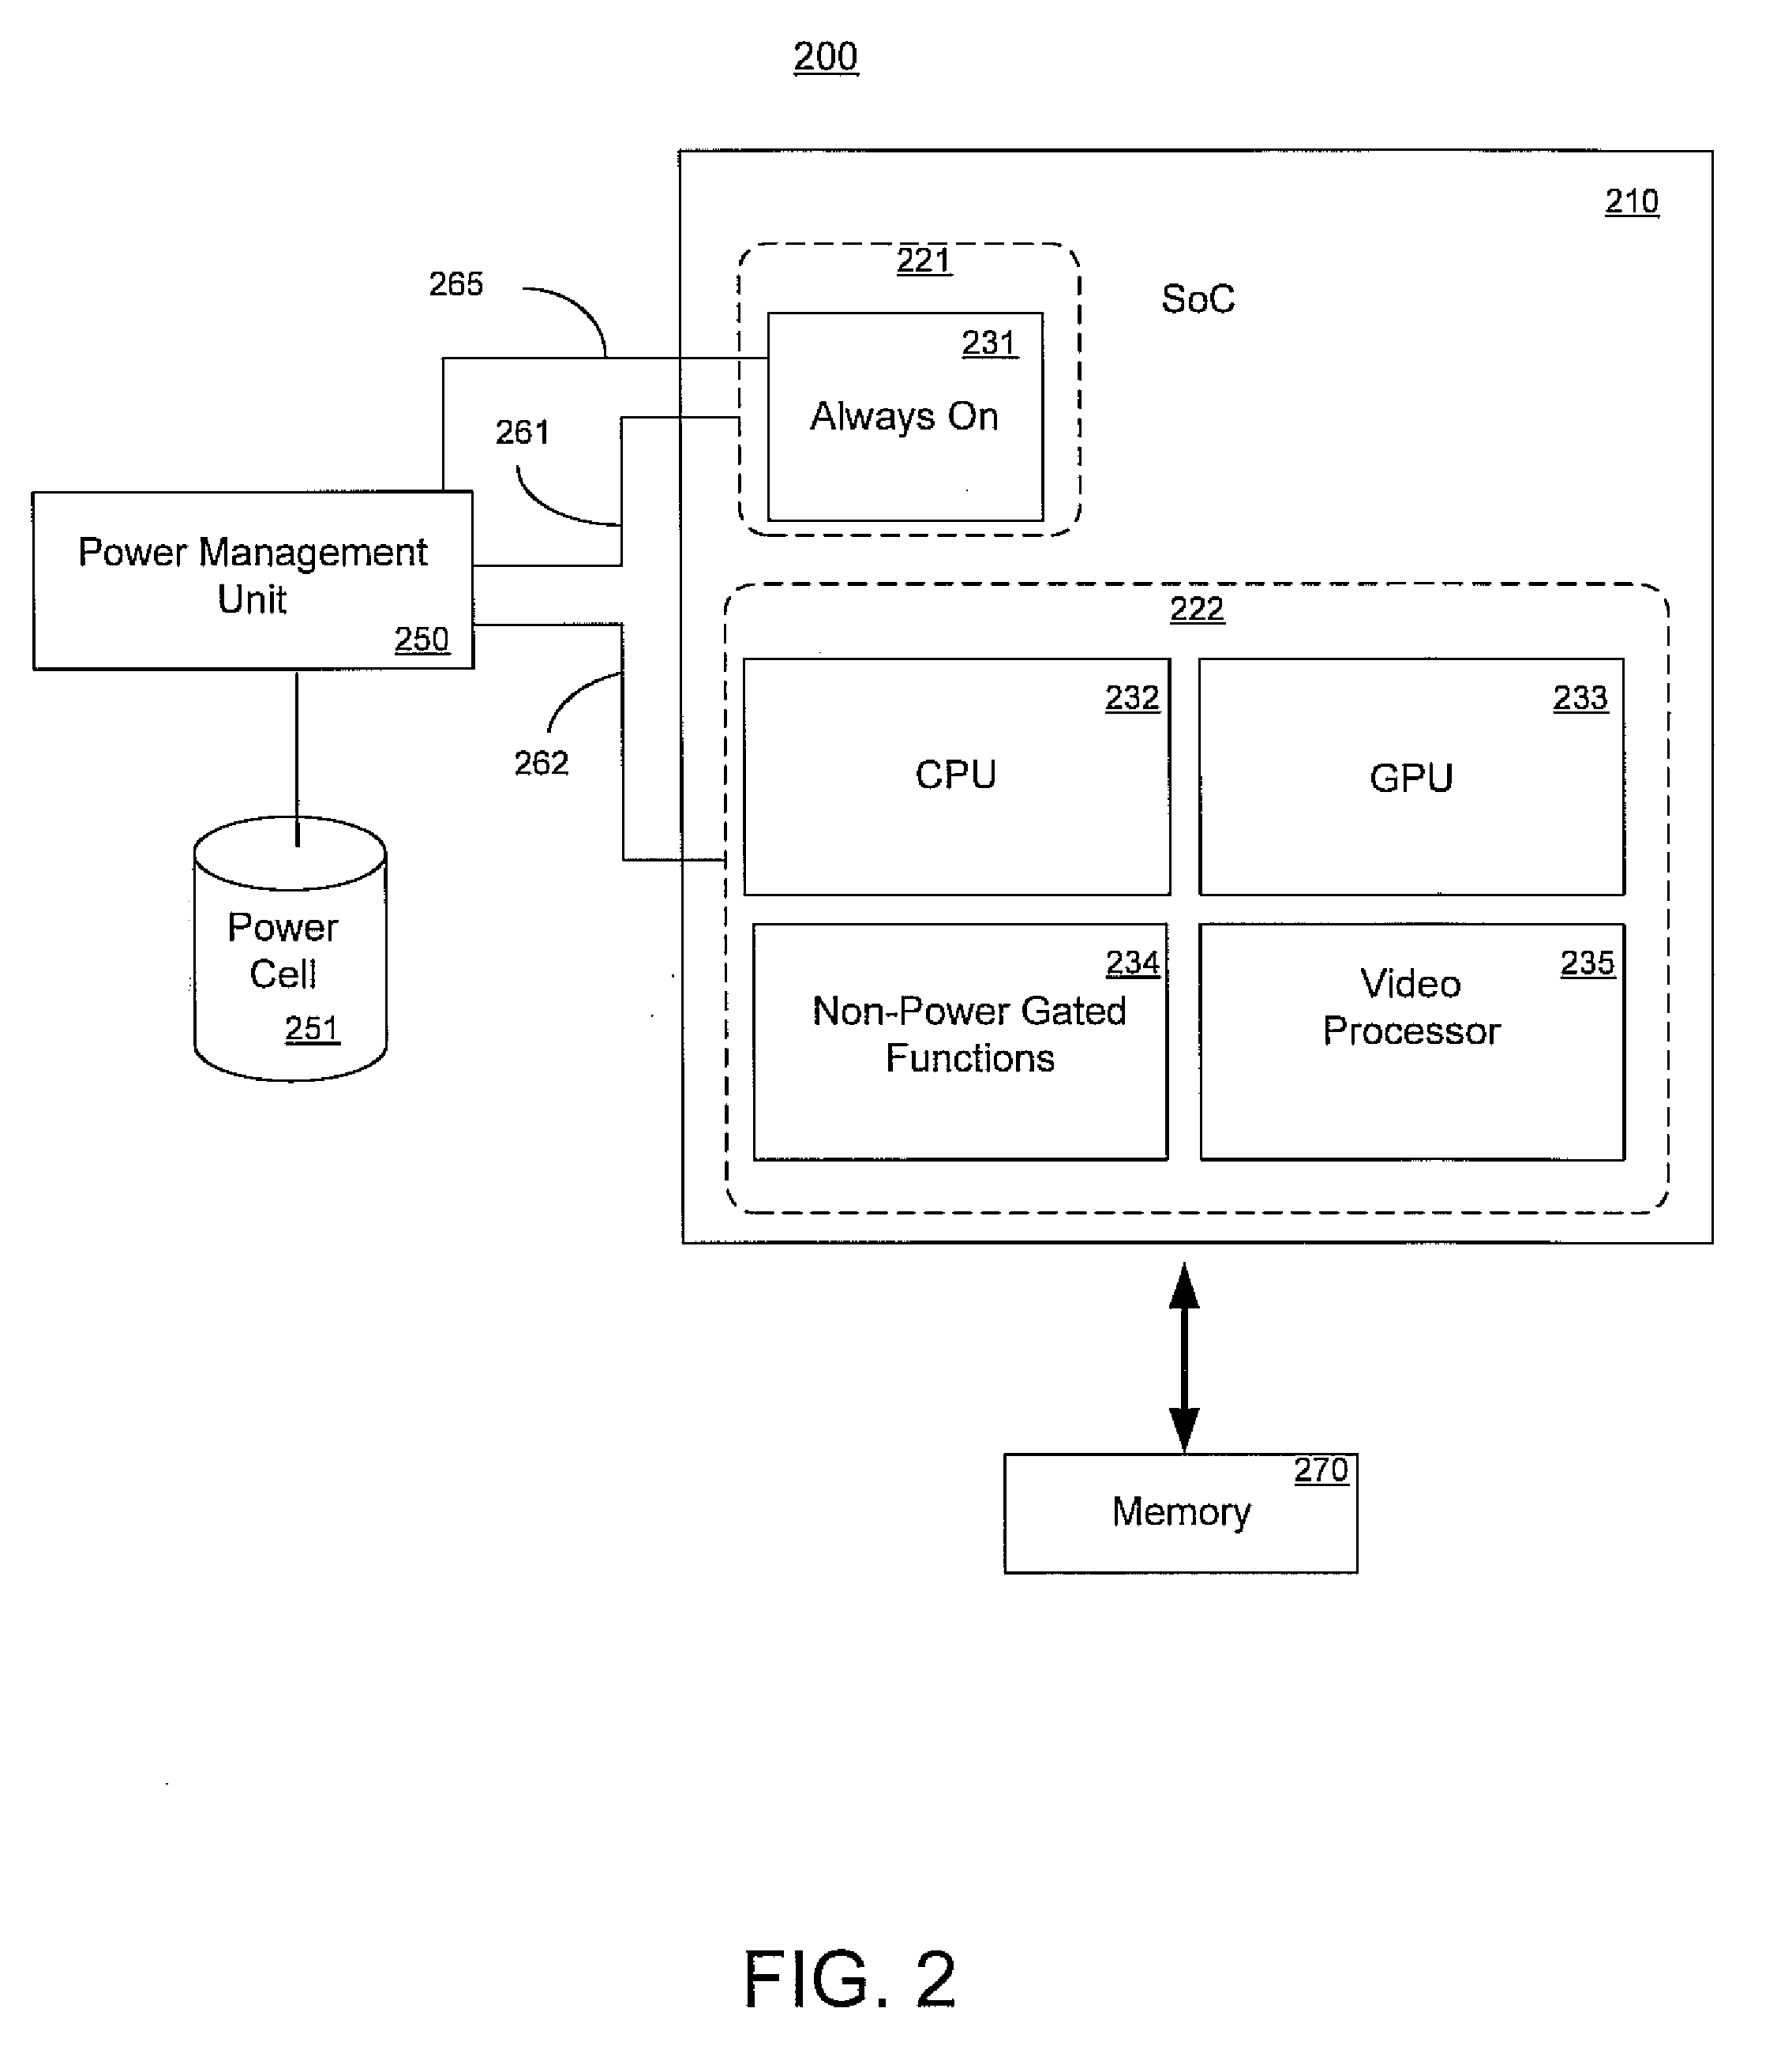 Integrated circuit device having power domains and partitions based on use case power optimization